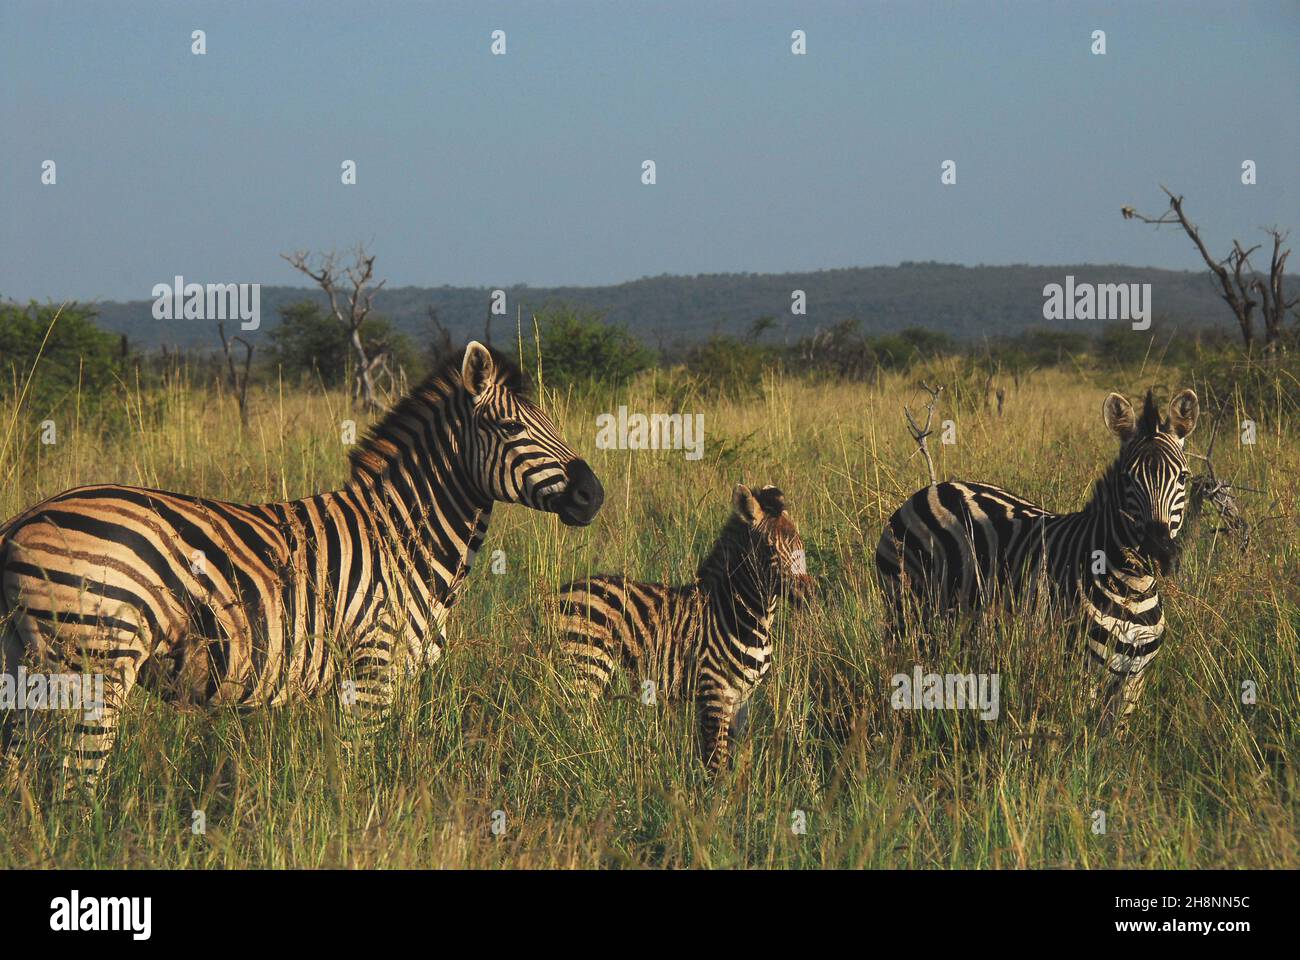 A wonderful image of a wild Zebra mother, father and colt alone as a family, standing in tall grass. Shot while on safari in South Africa. Stock Photo